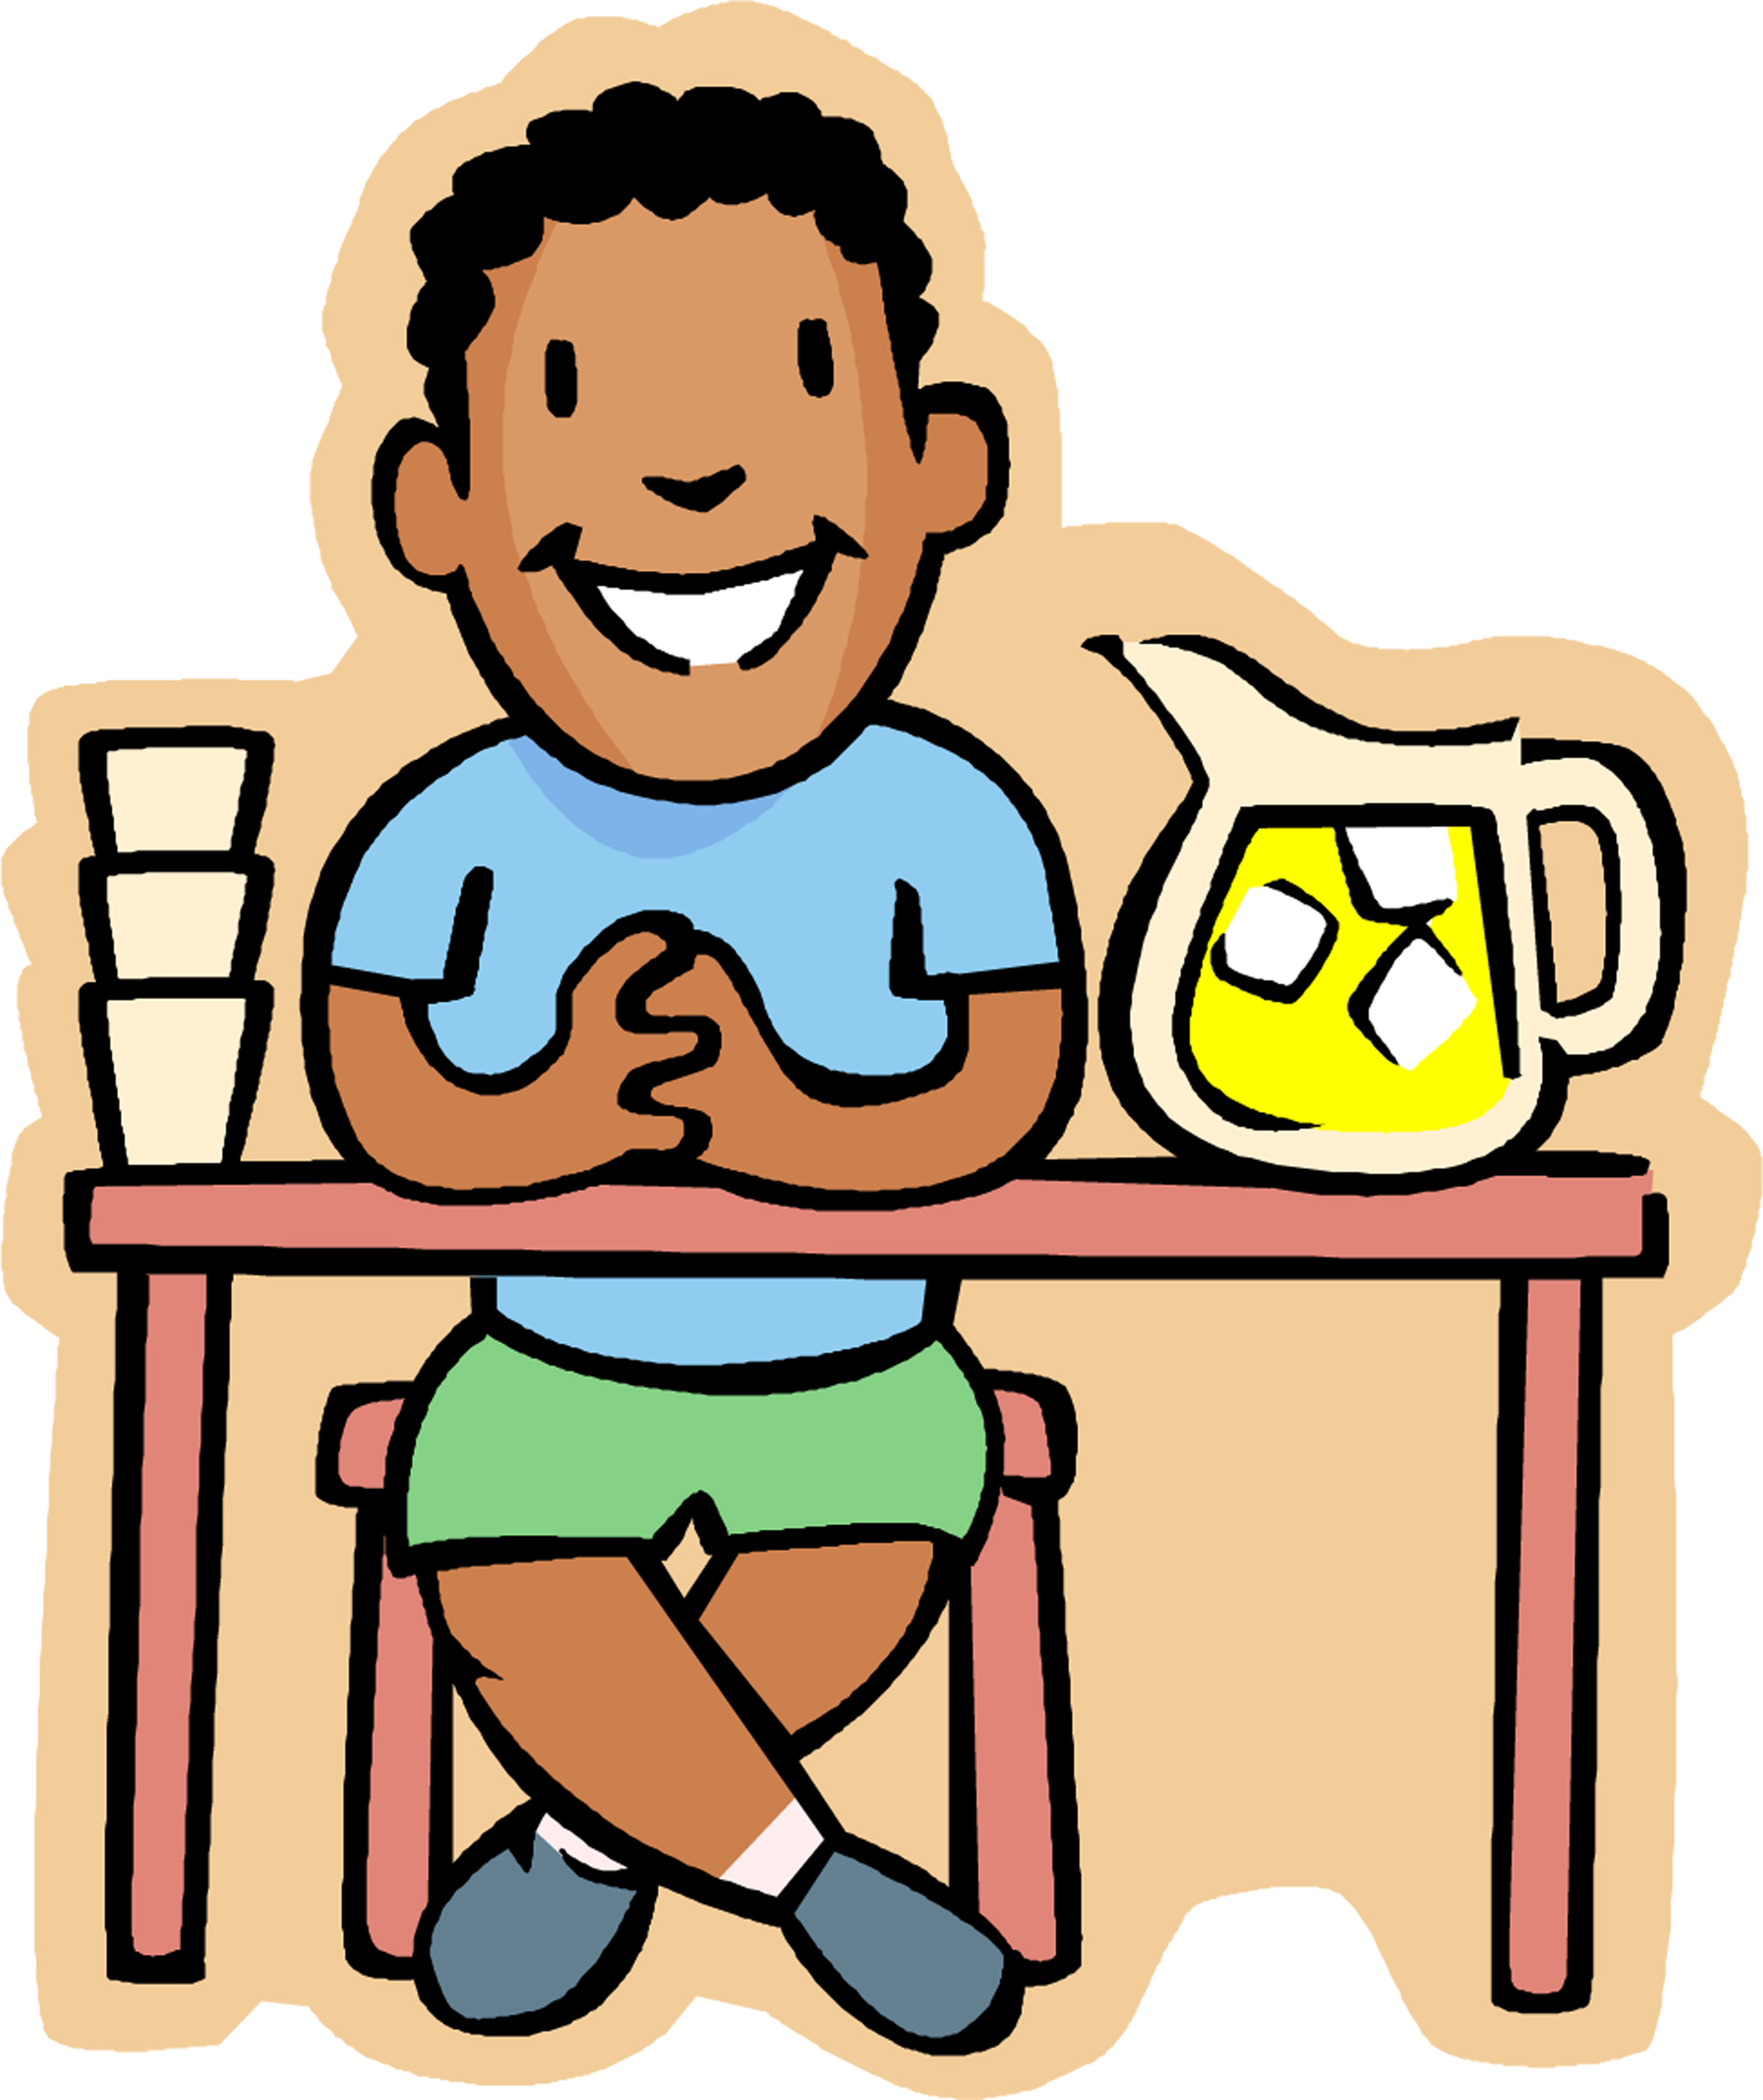 Images For > Cup Of Lemonade Clipart